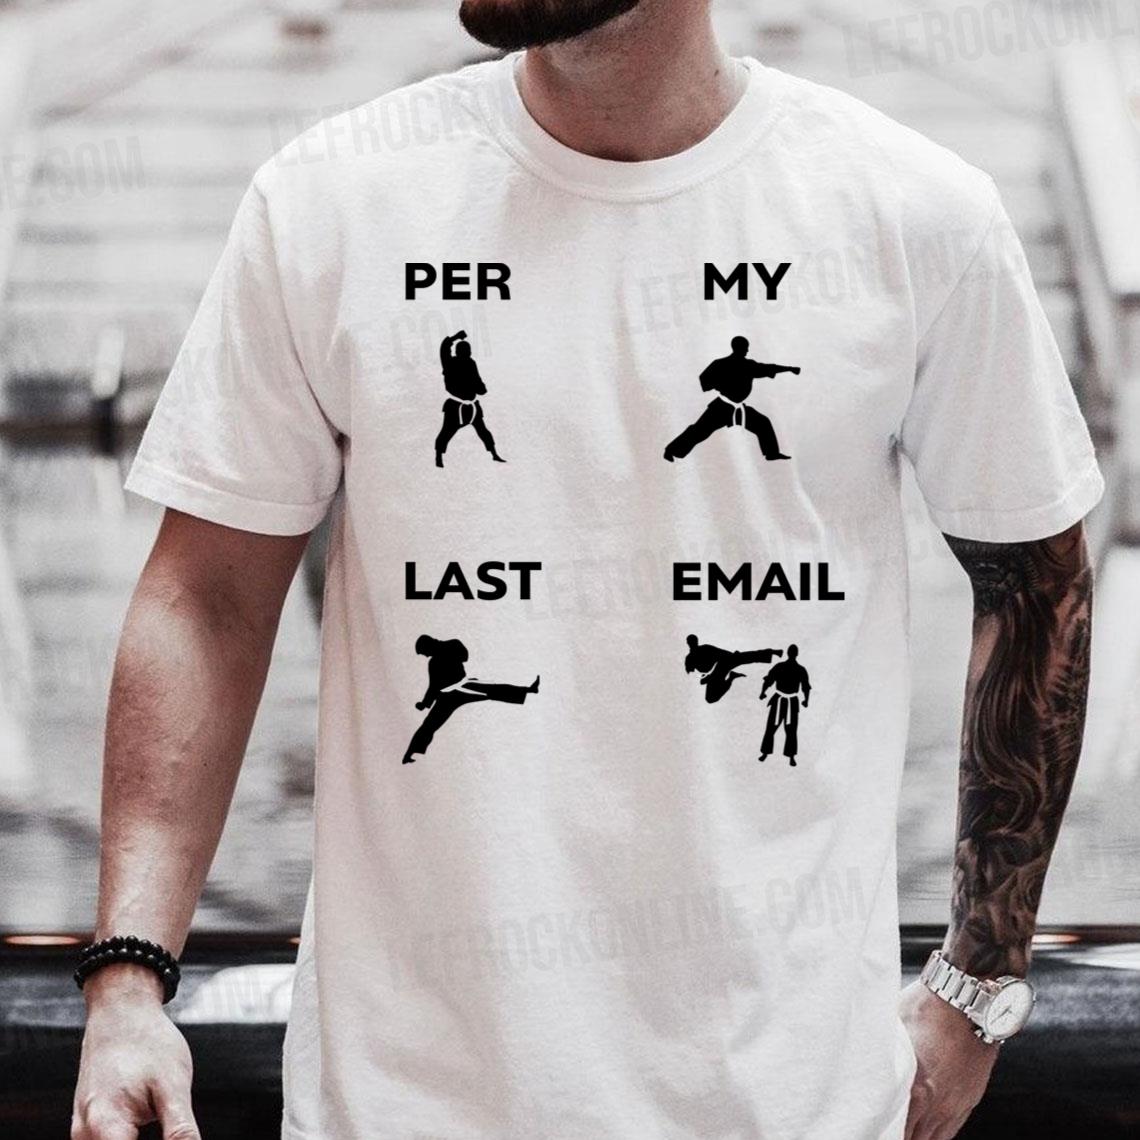 Funny Karate Graphic With Per My Last Email Shirt Quote Per My Last Email Shirt